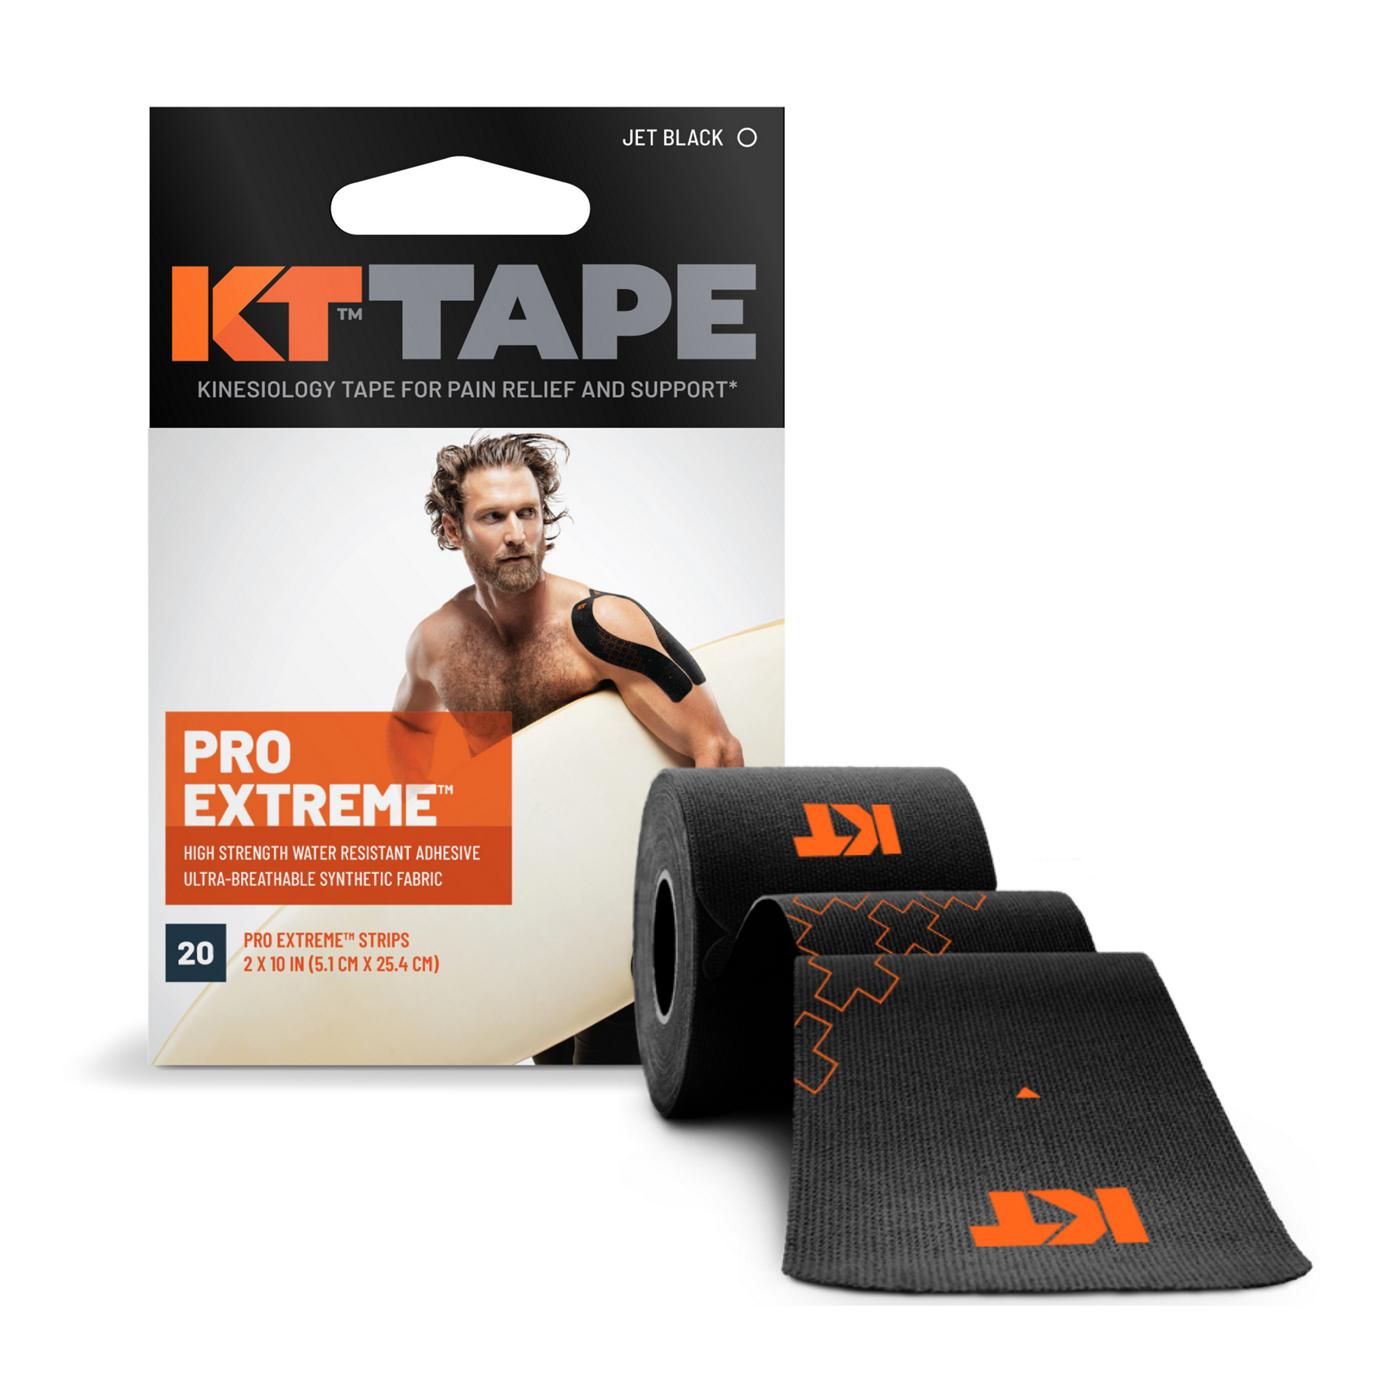 KT Tape Pro Extreme Extra Strength Adhesive Tape - Black; image 2 of 2